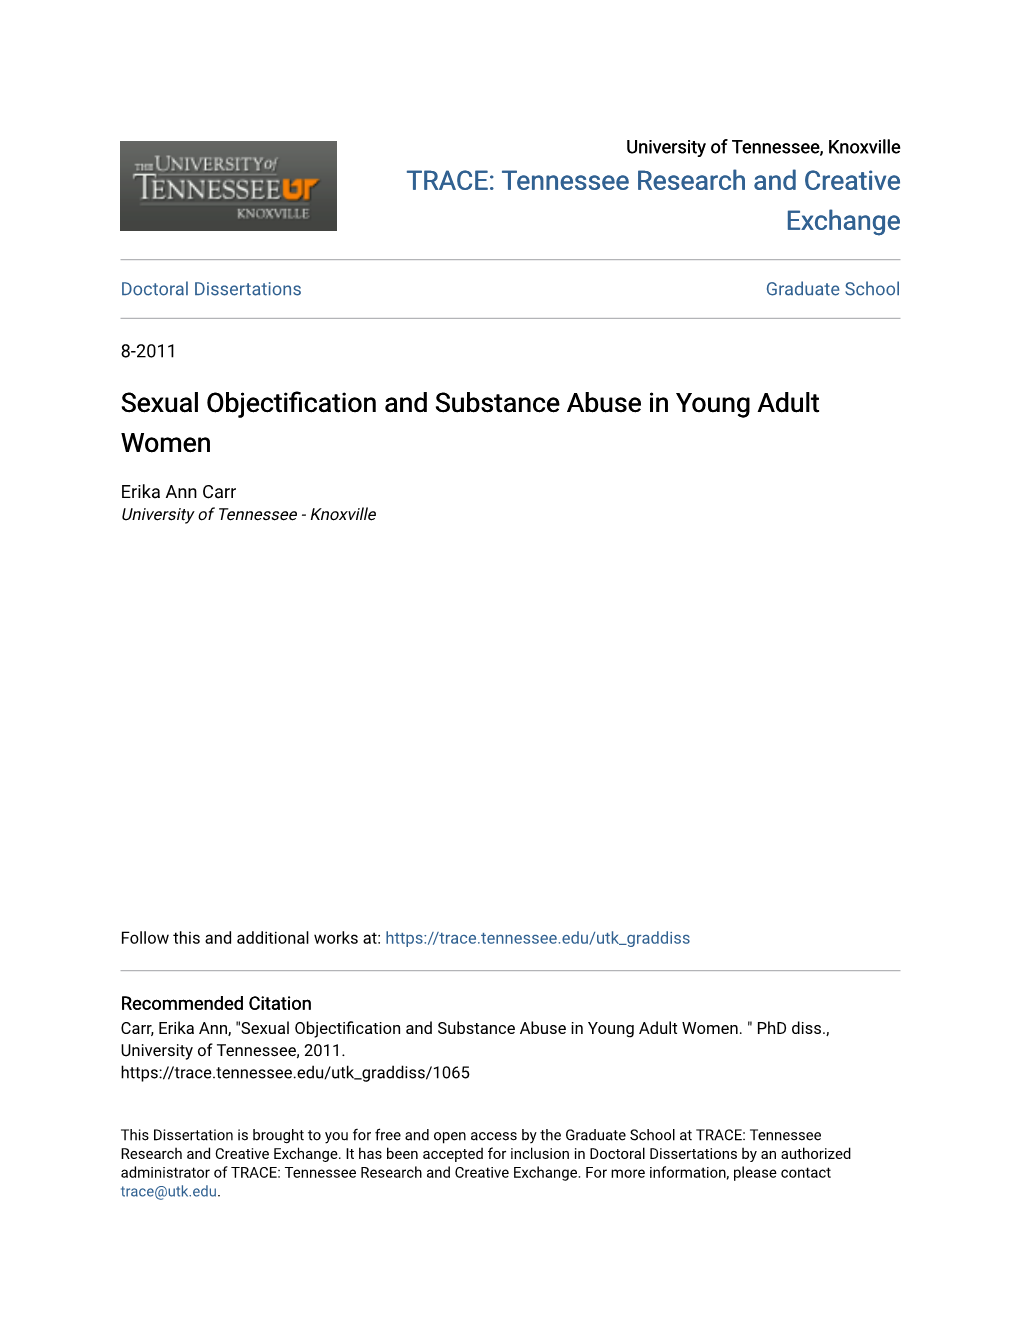 Sexual Objectification and Substance Abuse in Young Adult Women